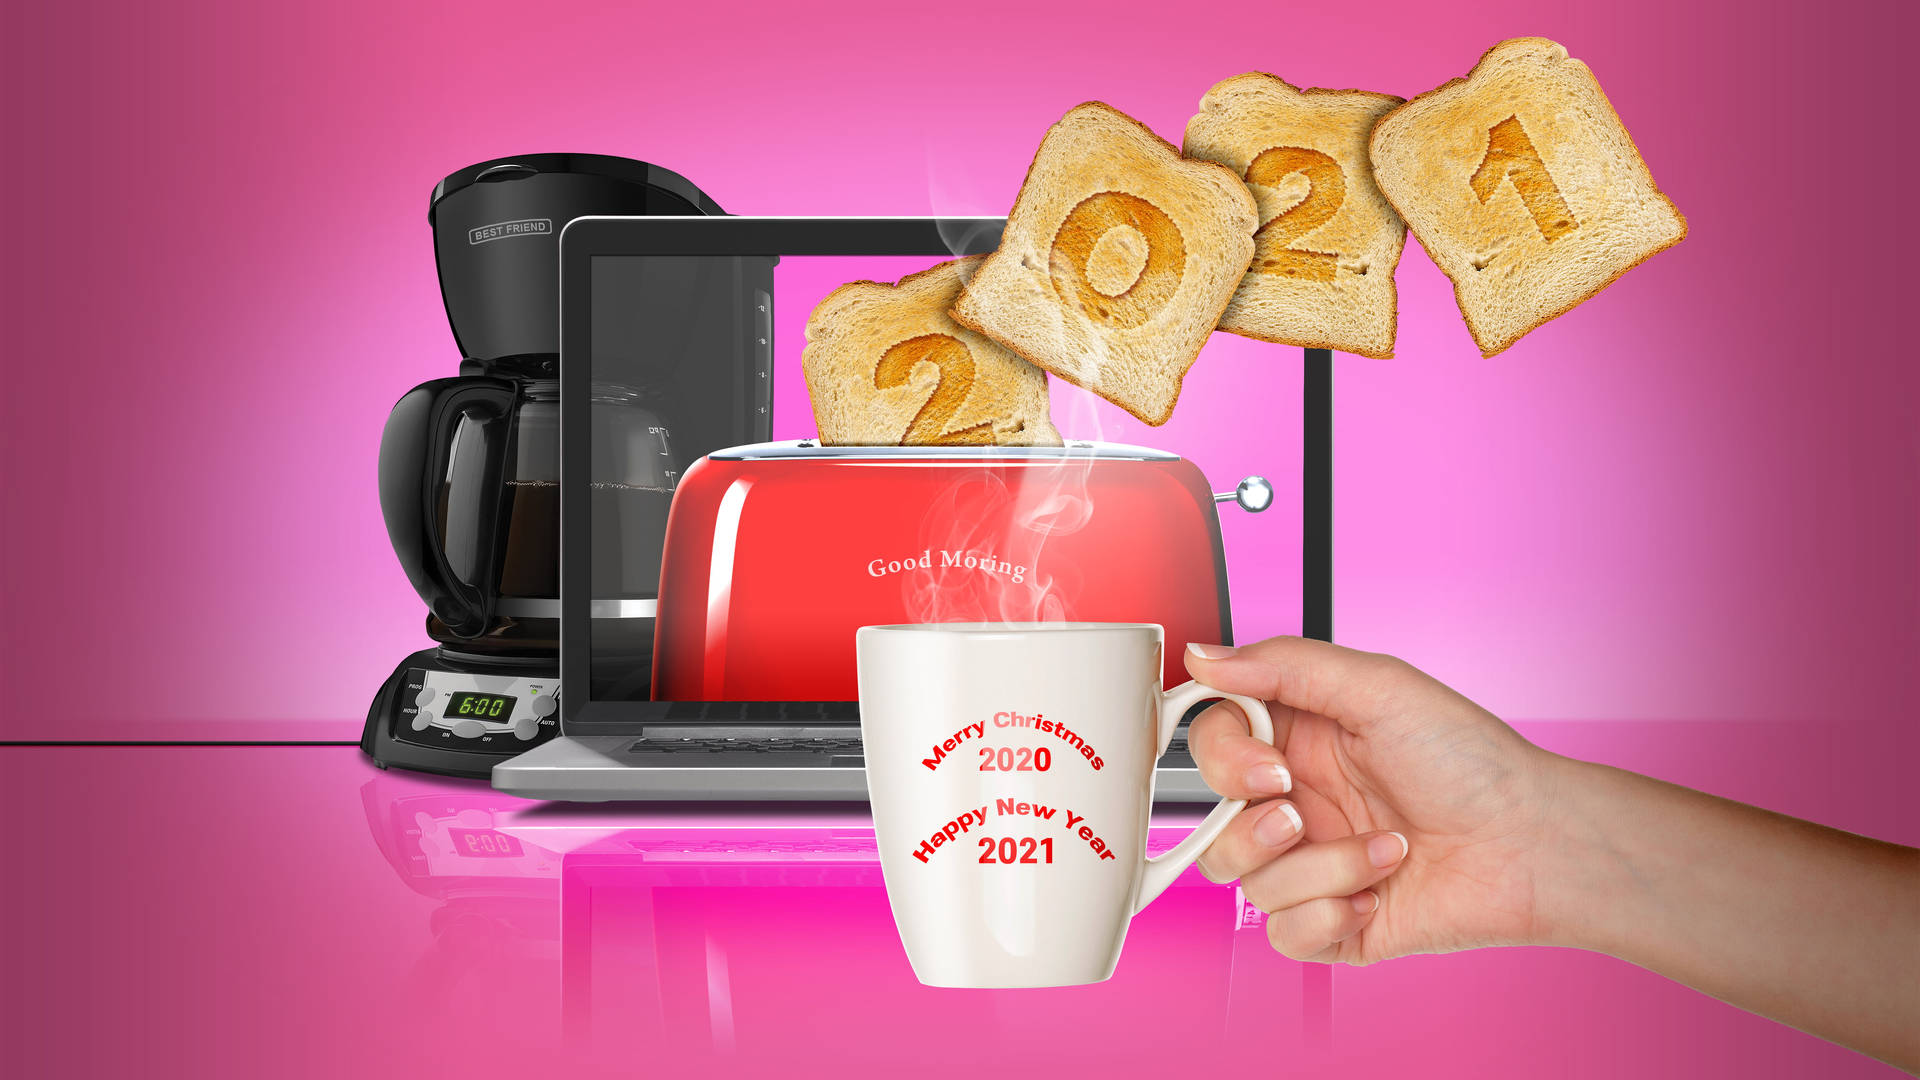 Toaster And Coffee 2021 Desktop